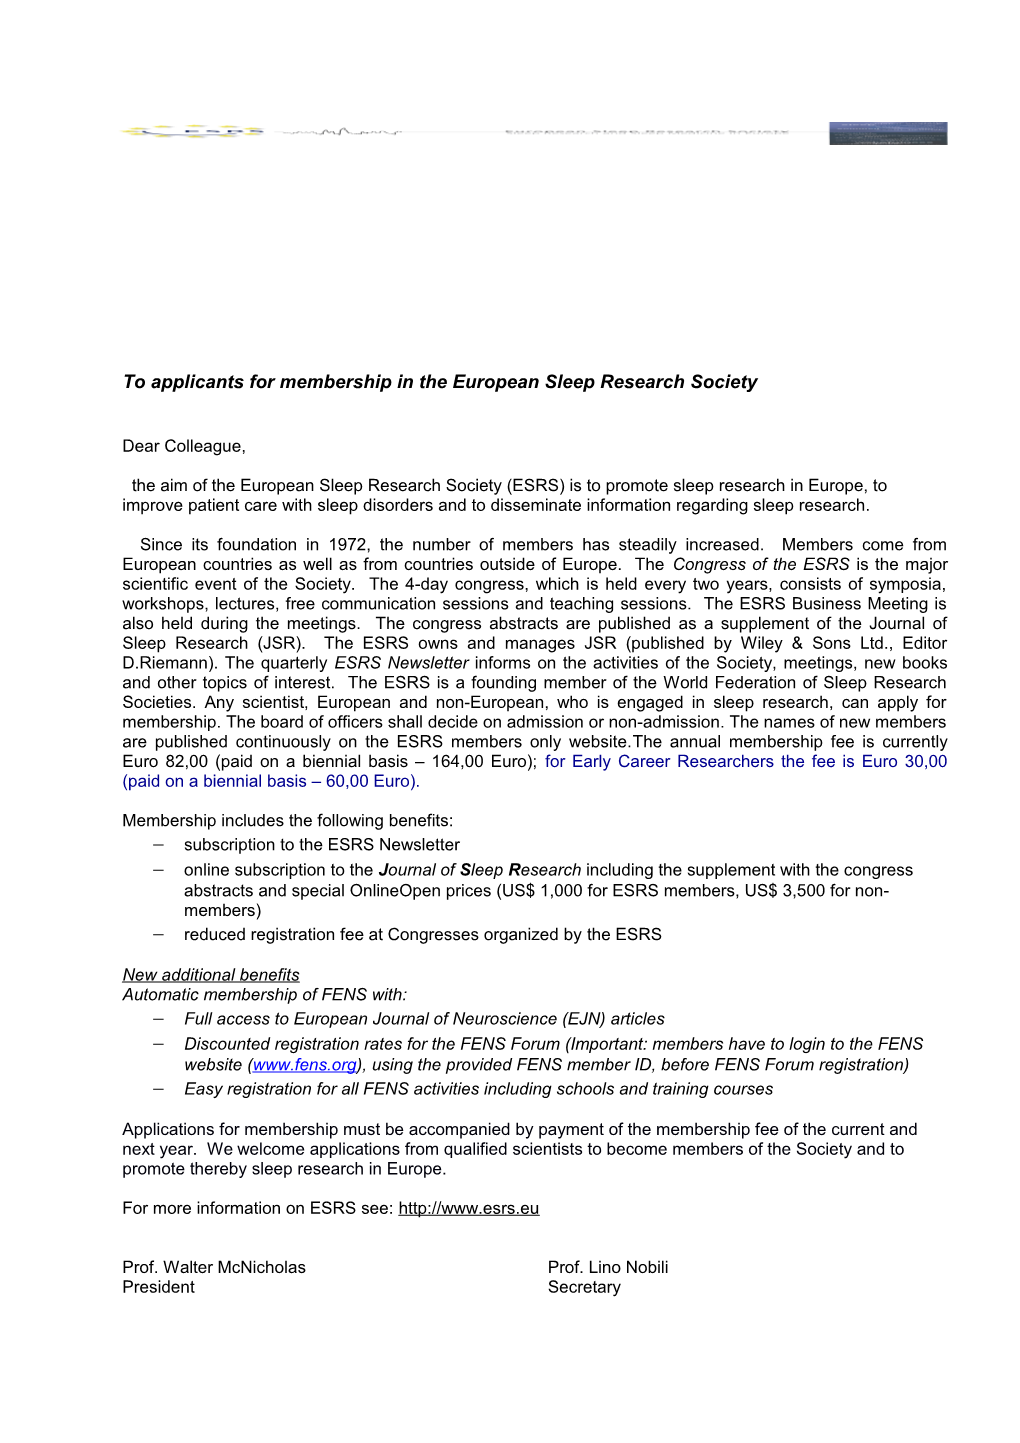 To Applicants for Membership in the European Sleep Research Society